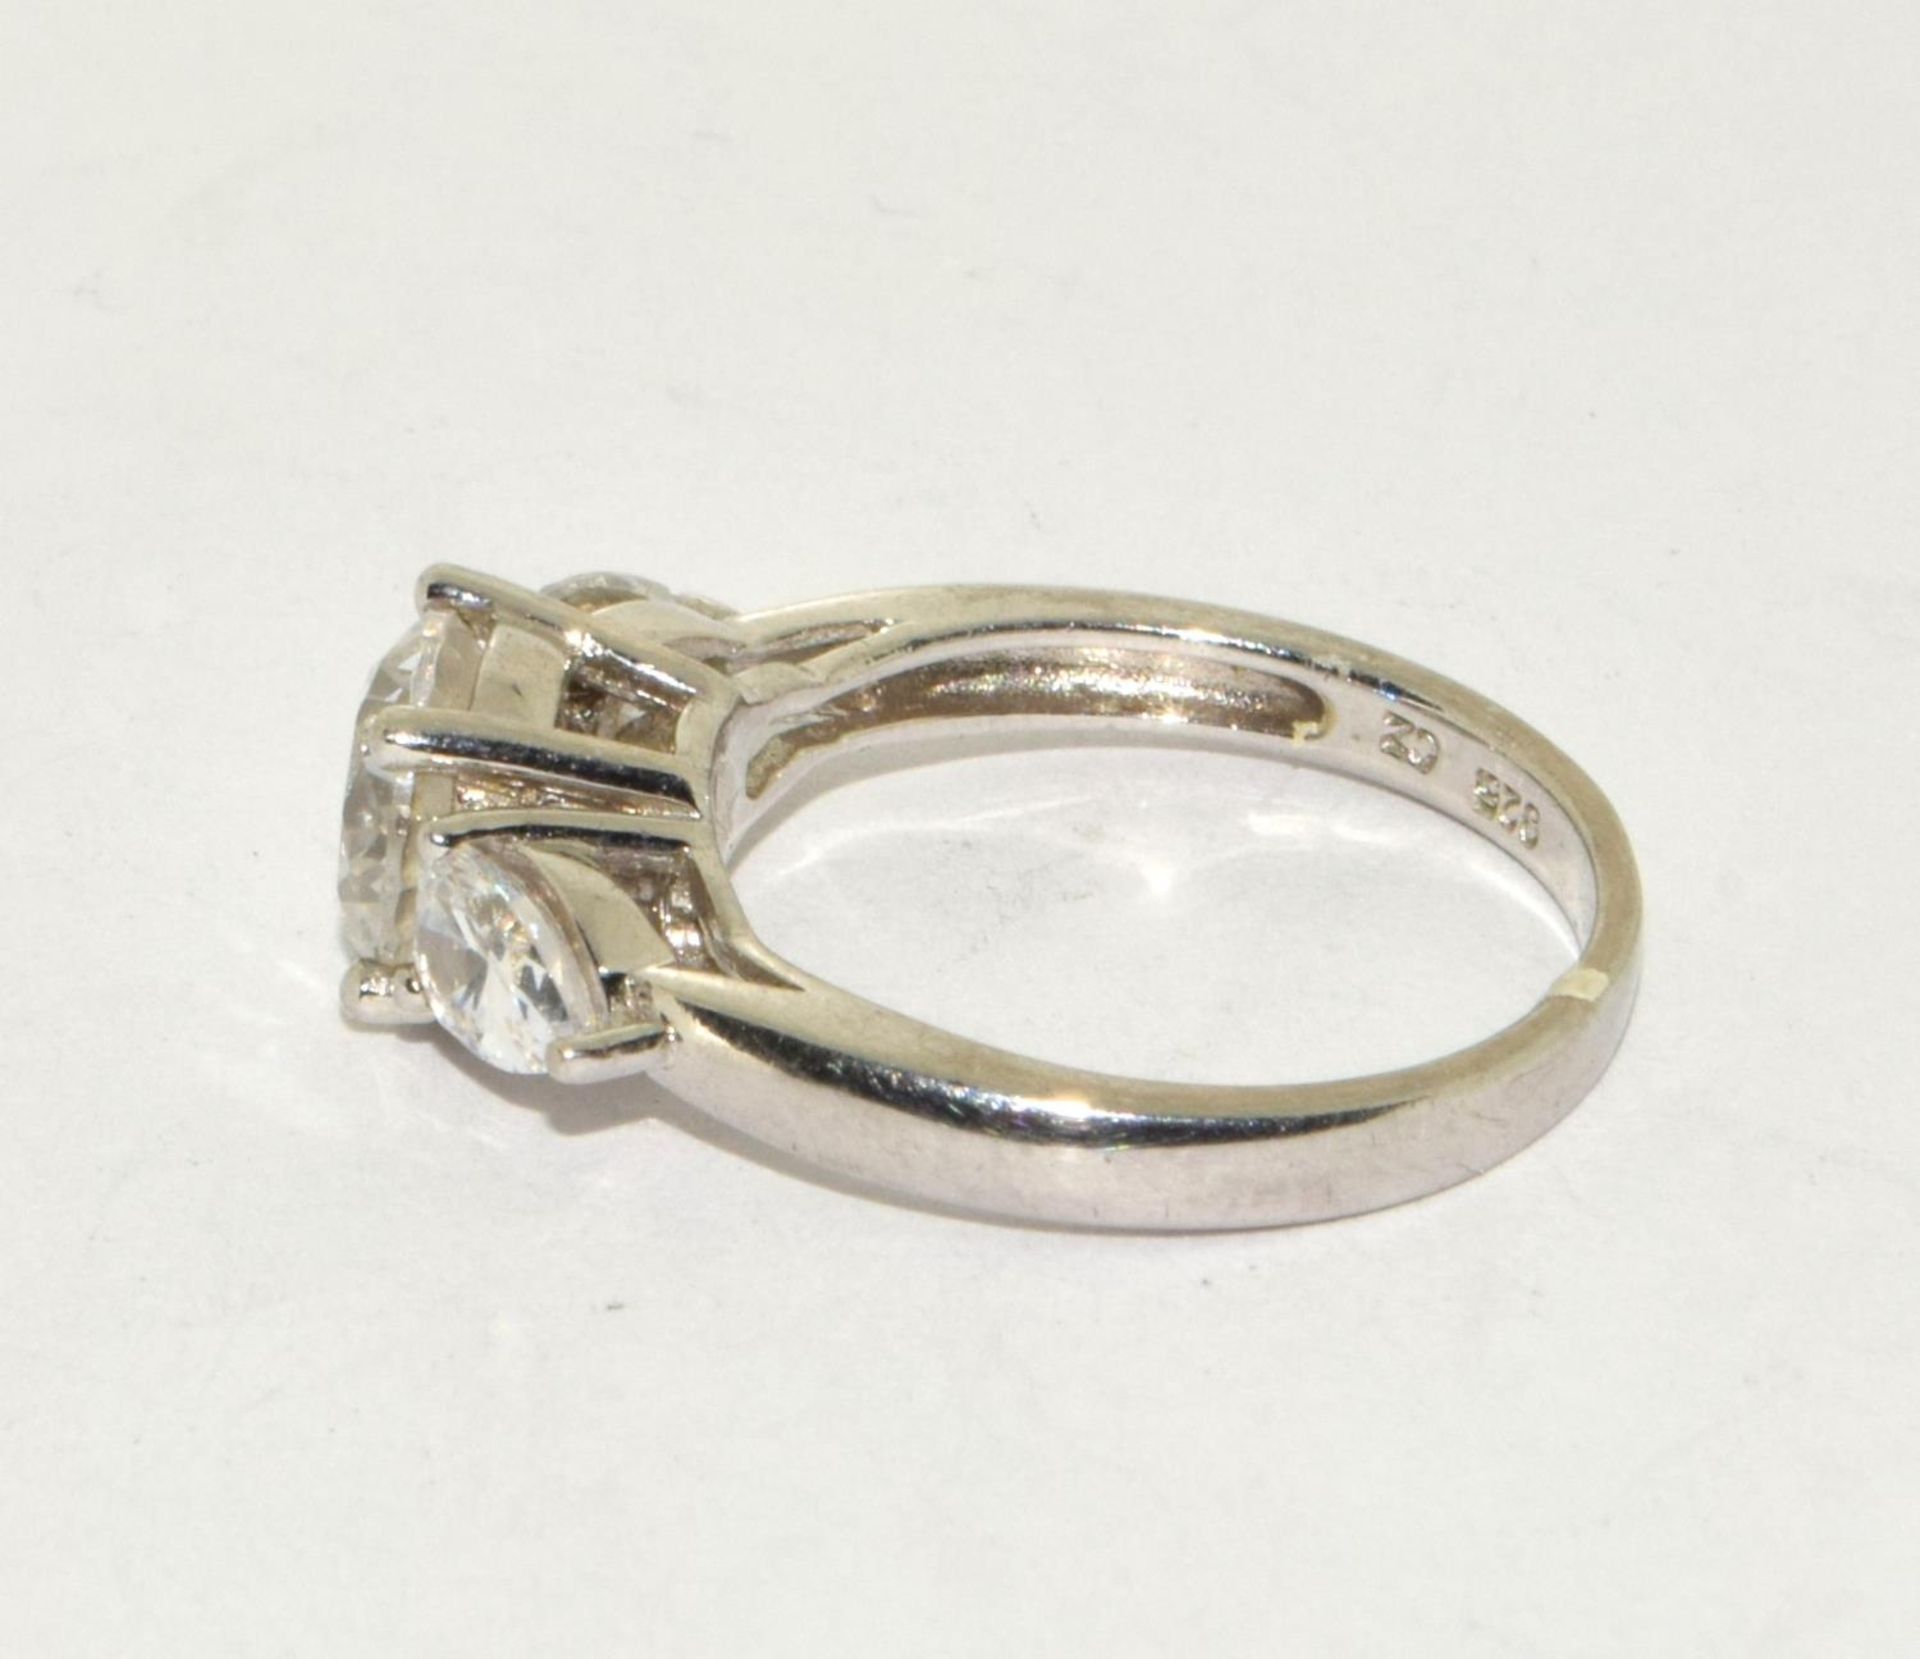 A sparkling 3 stone CZ 925 silver ring Size M - Image 2 of 3